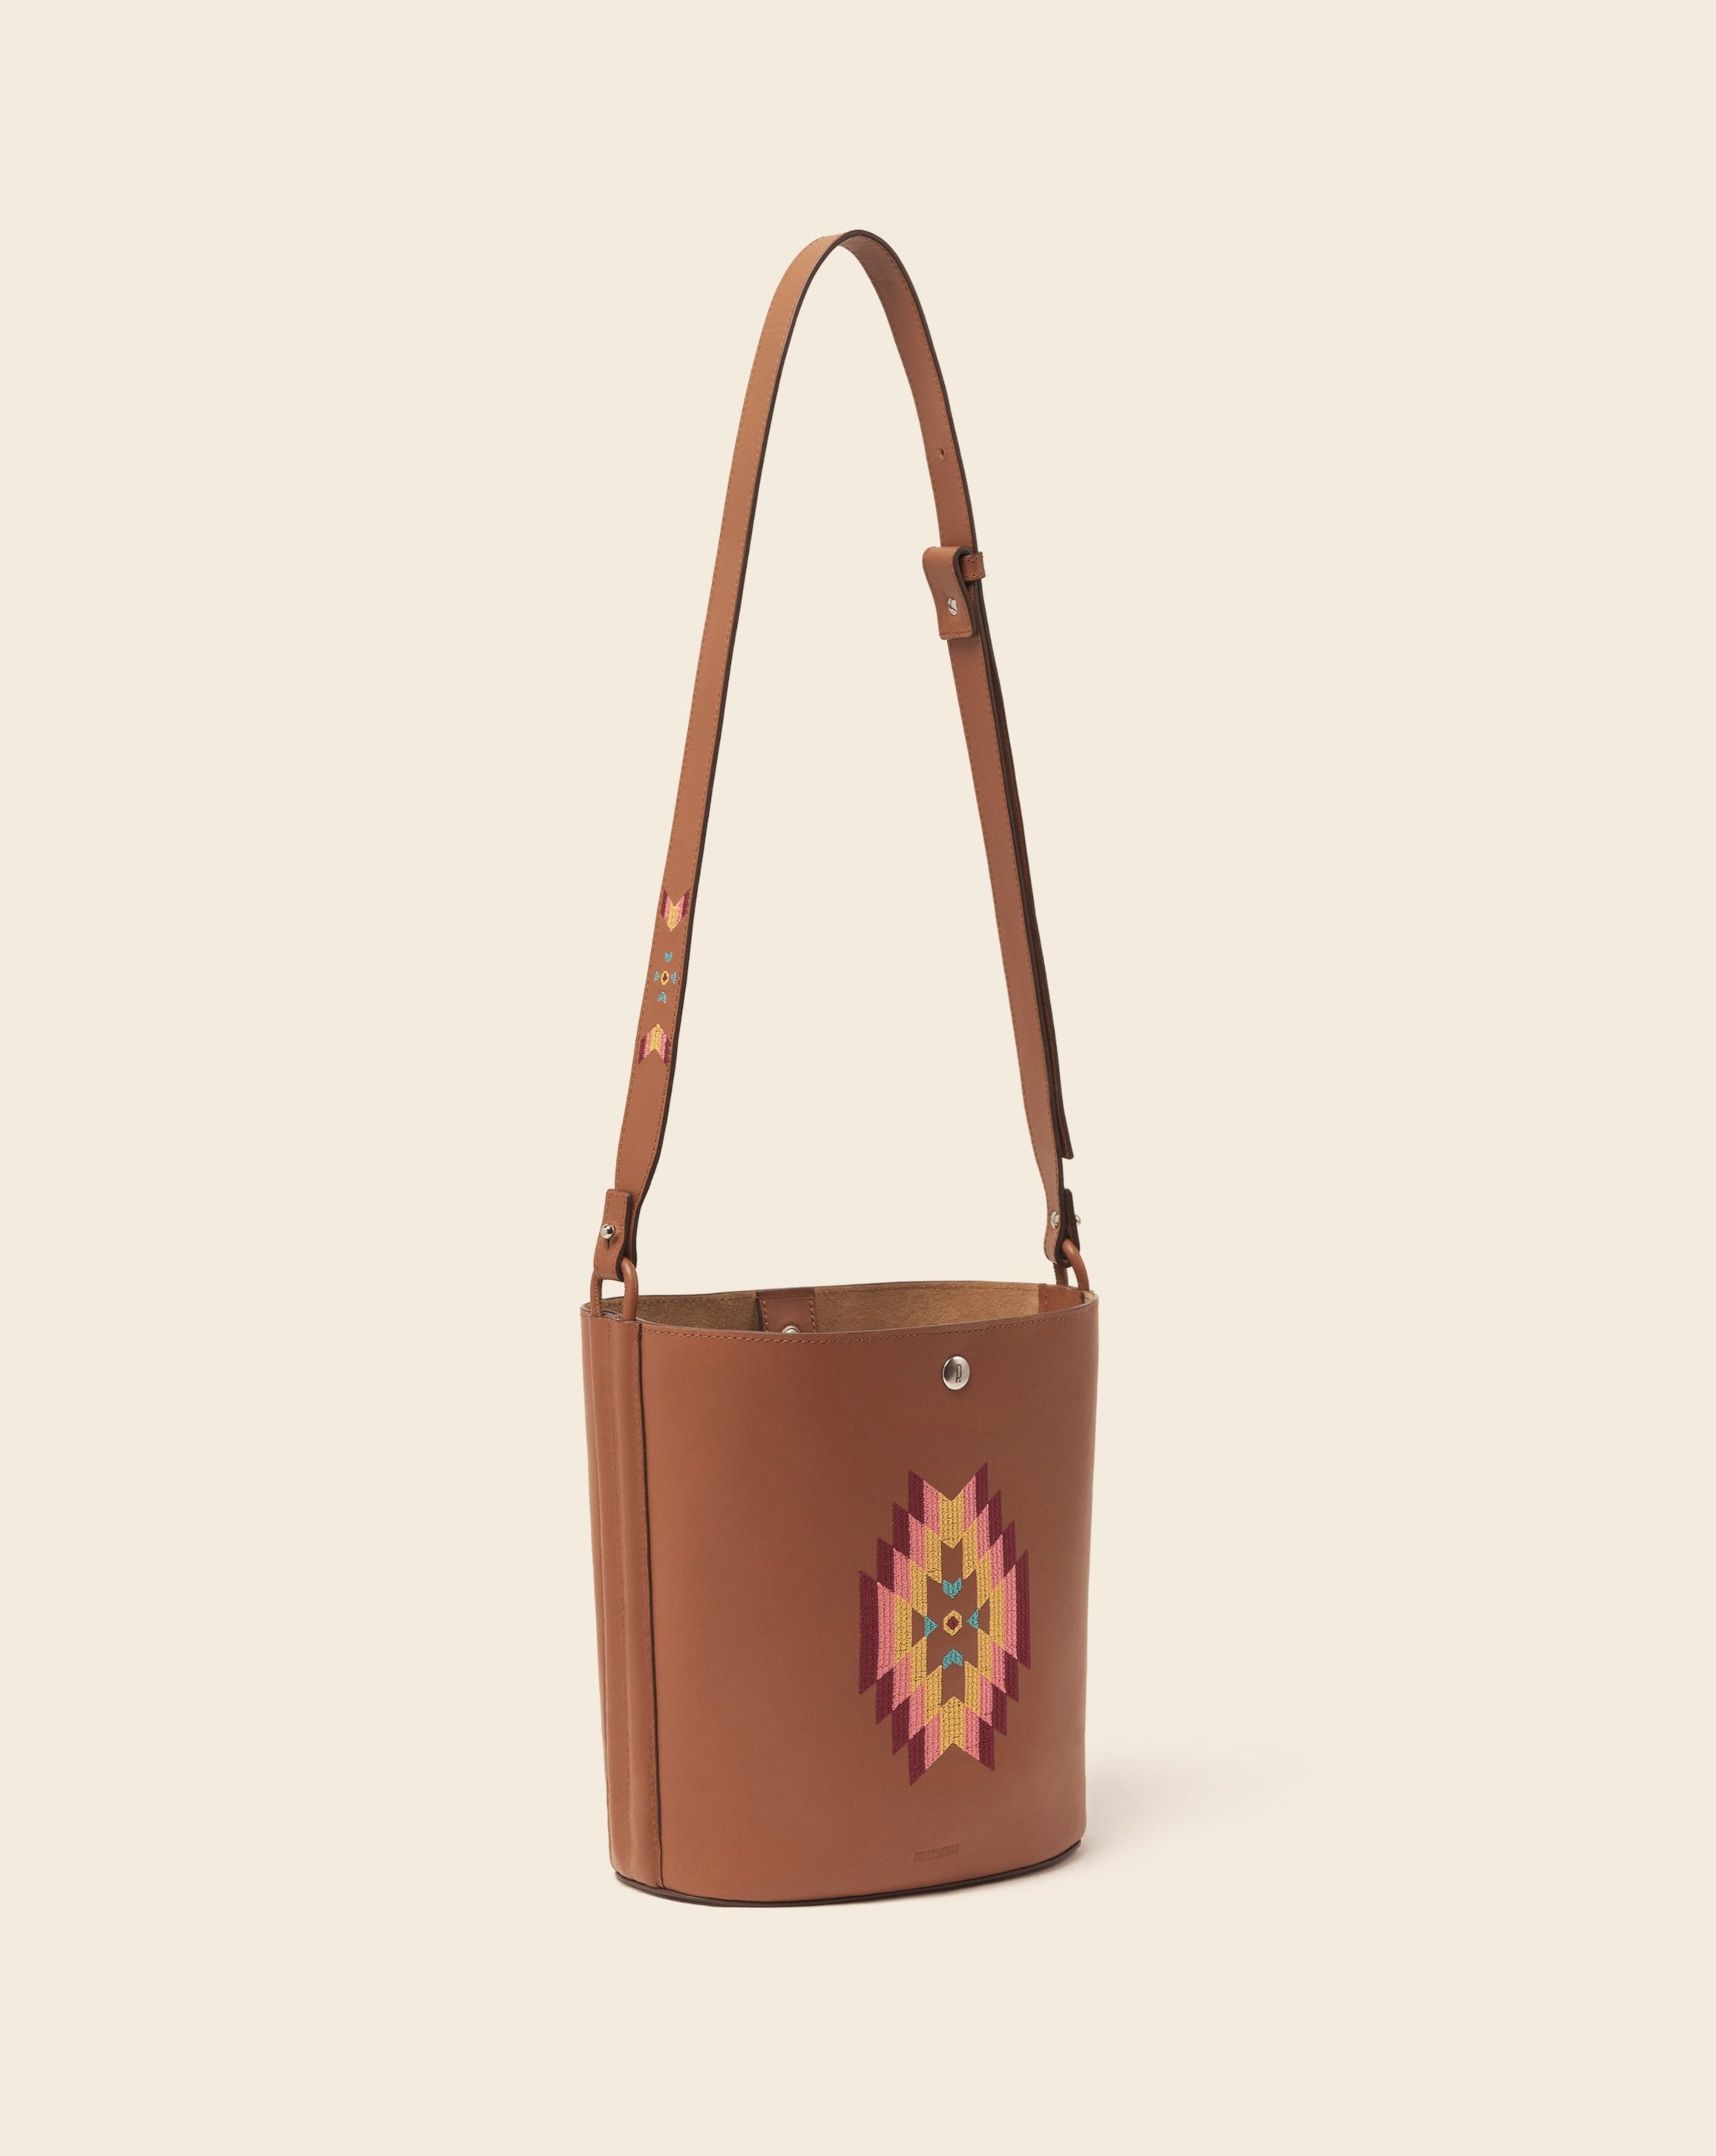 IOWA - Leather bucket bag - Gold leather & multicolored embroidery